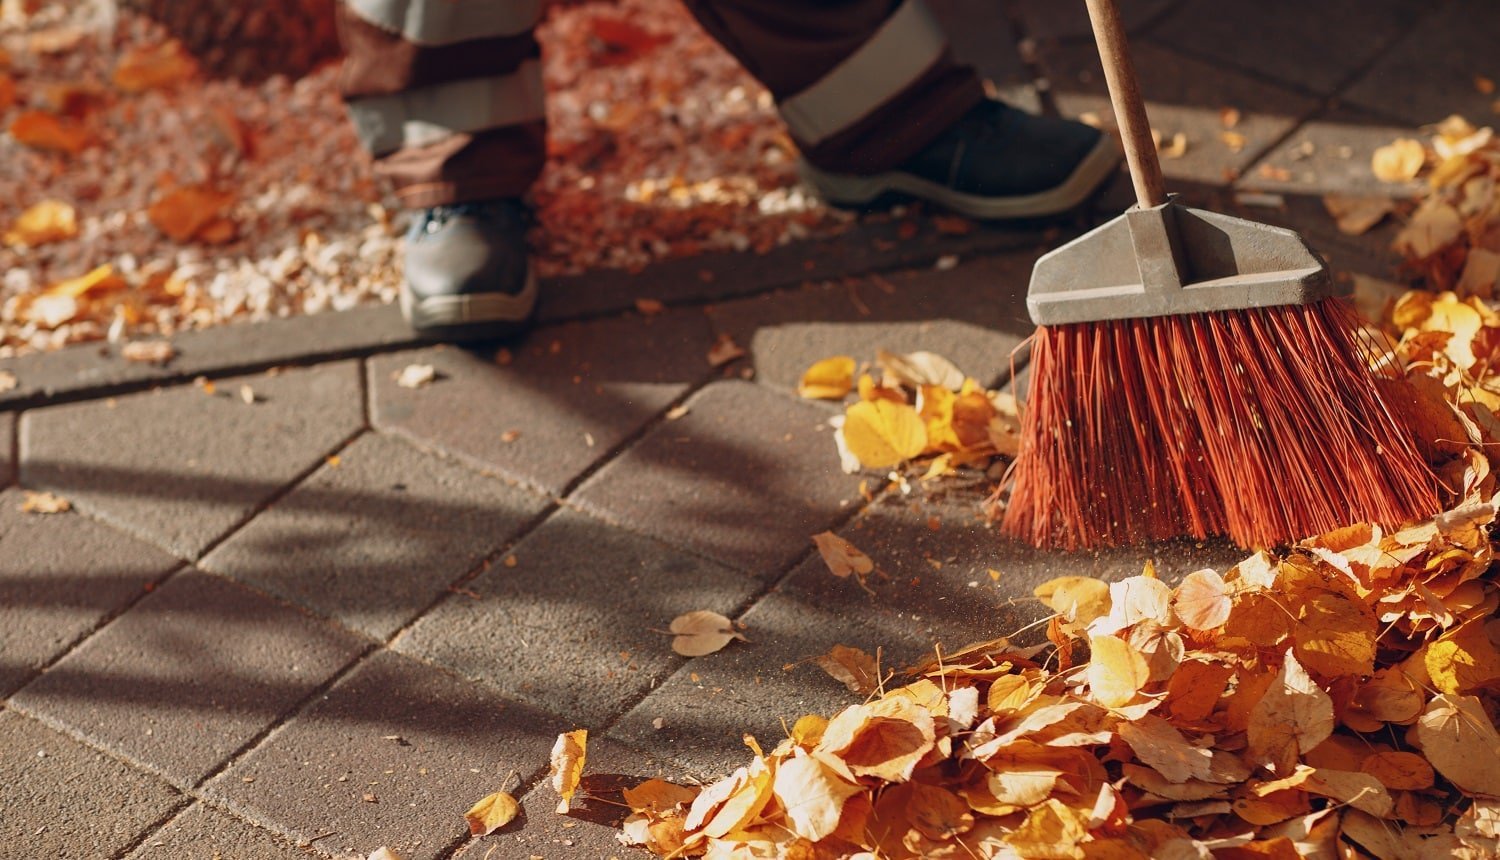 Janitor cleaner sweeping autumn leaves on the street